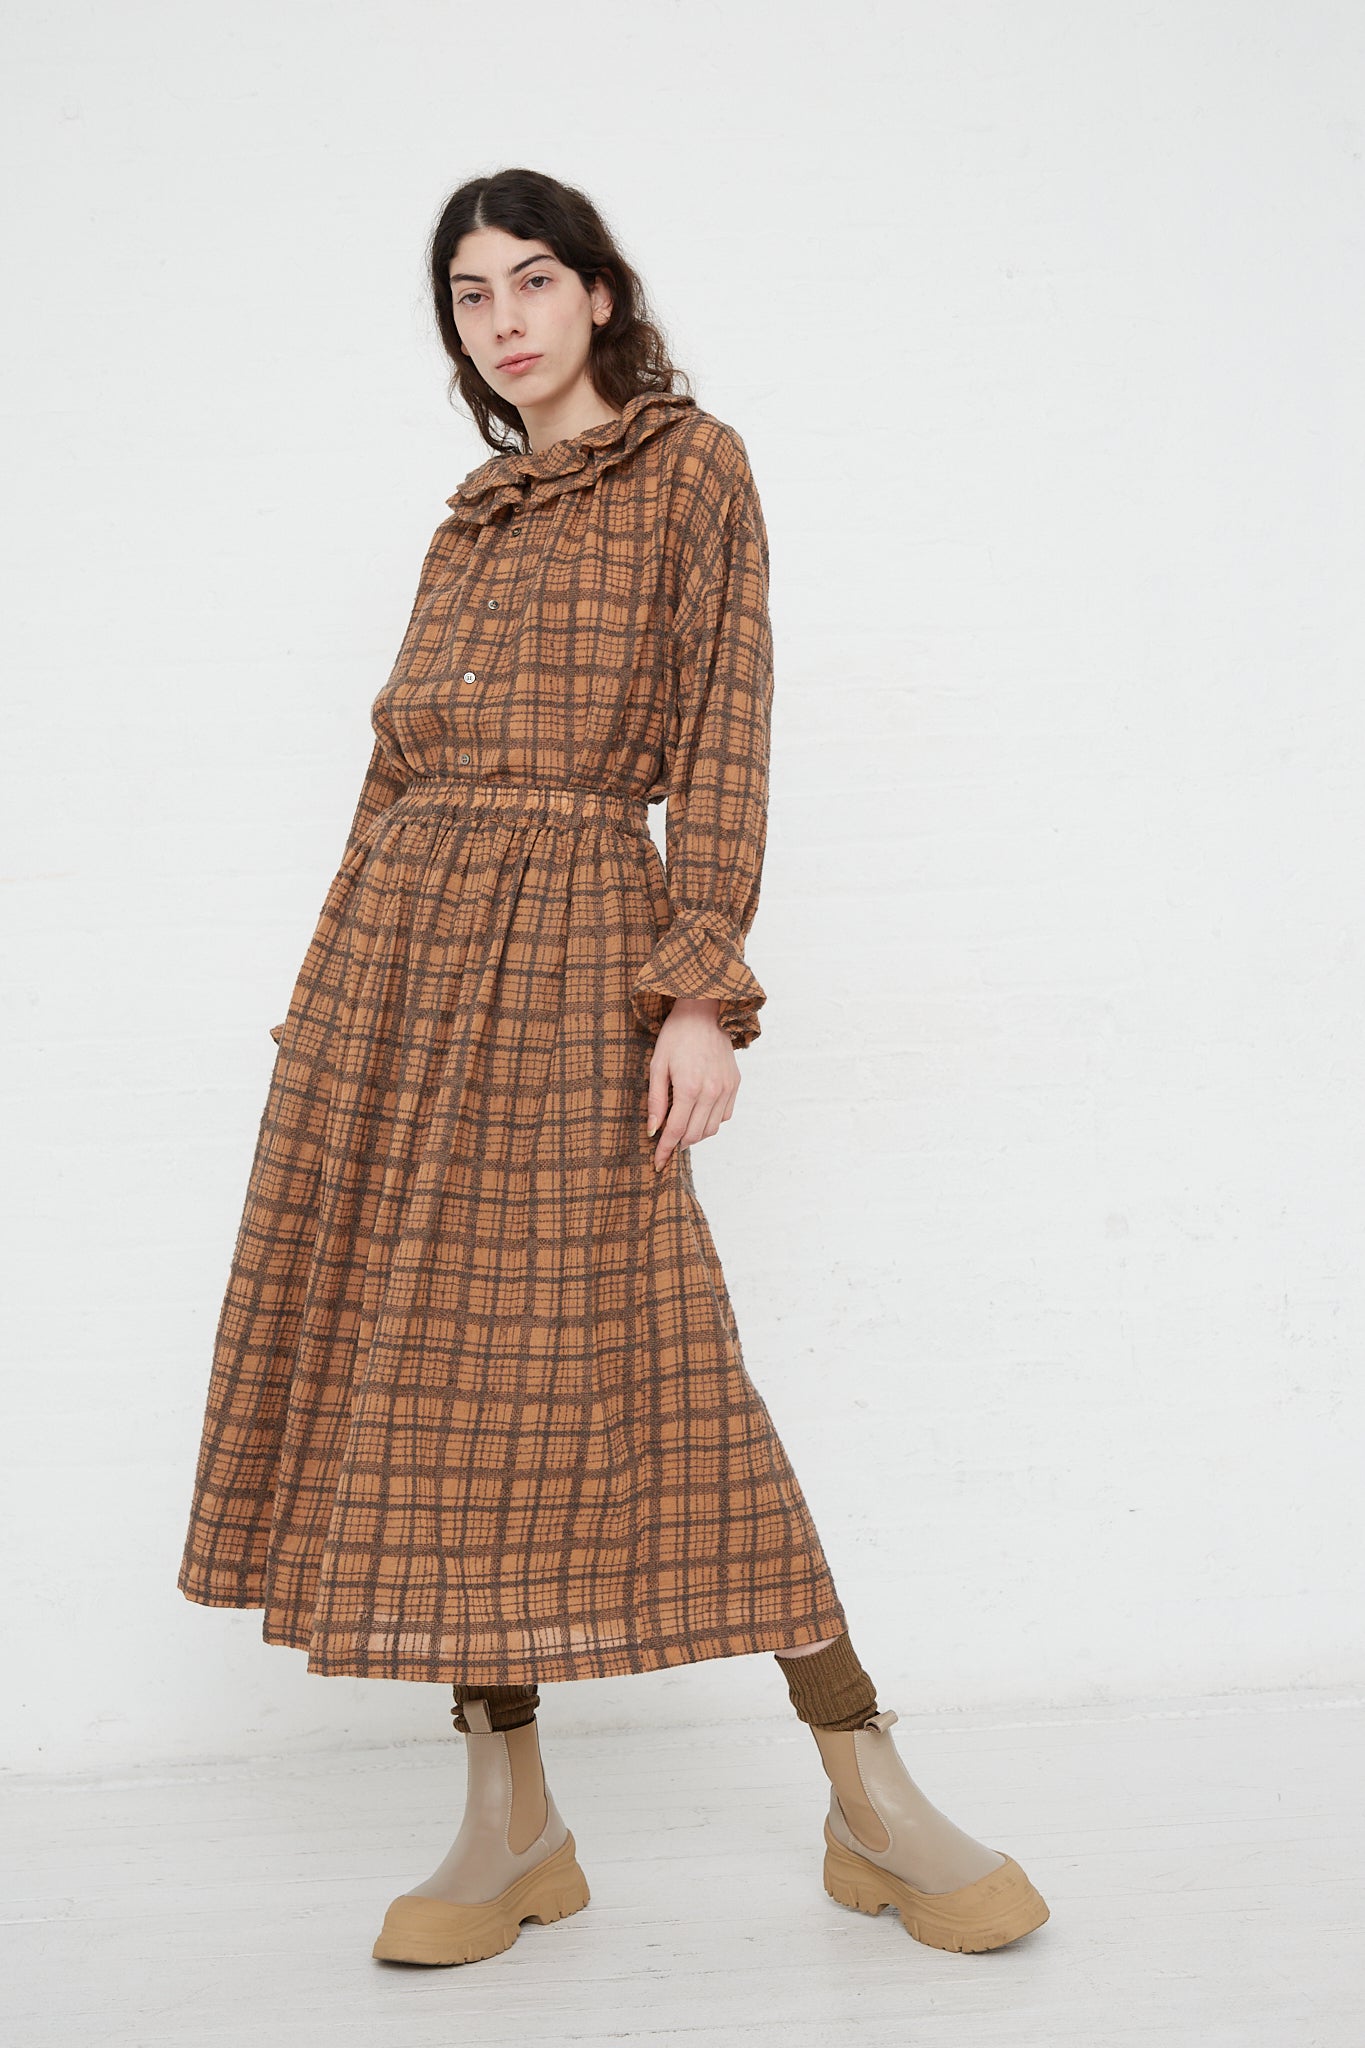 The model is wearing a Woven Wool Check Skirt in Terracotta by Ichi Antiquités with an elasticated waist.